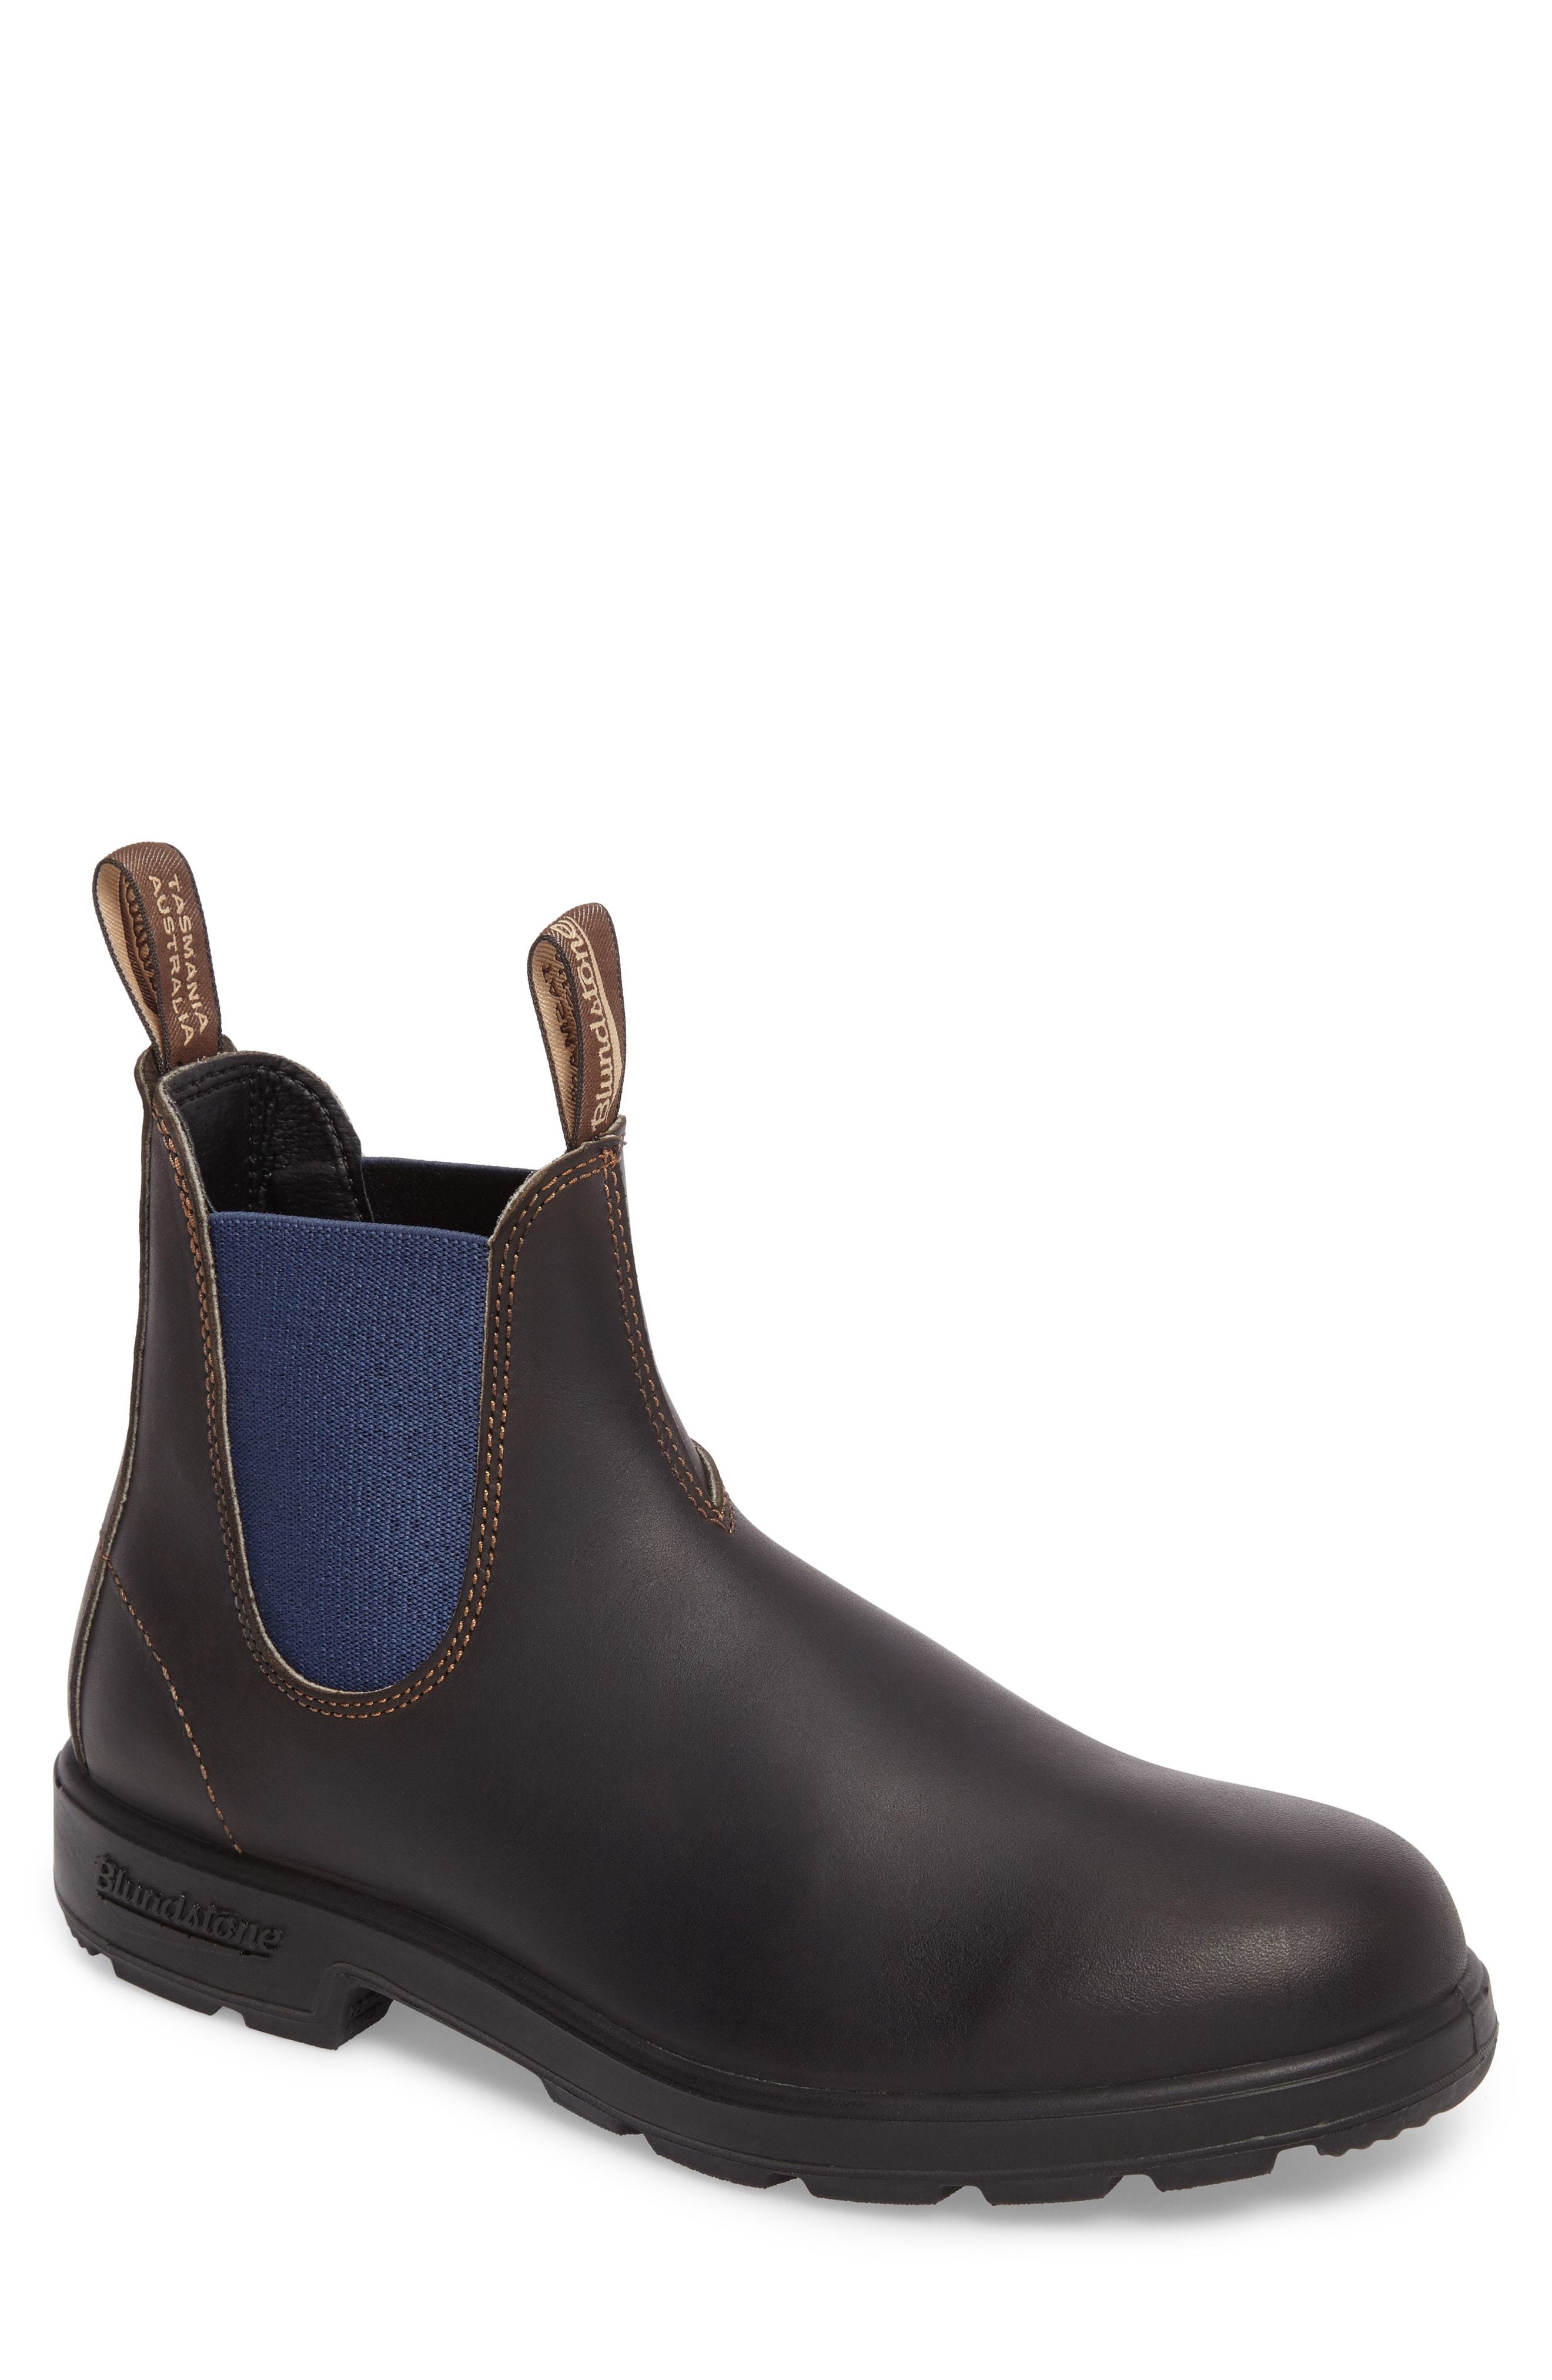 blundstone female boots